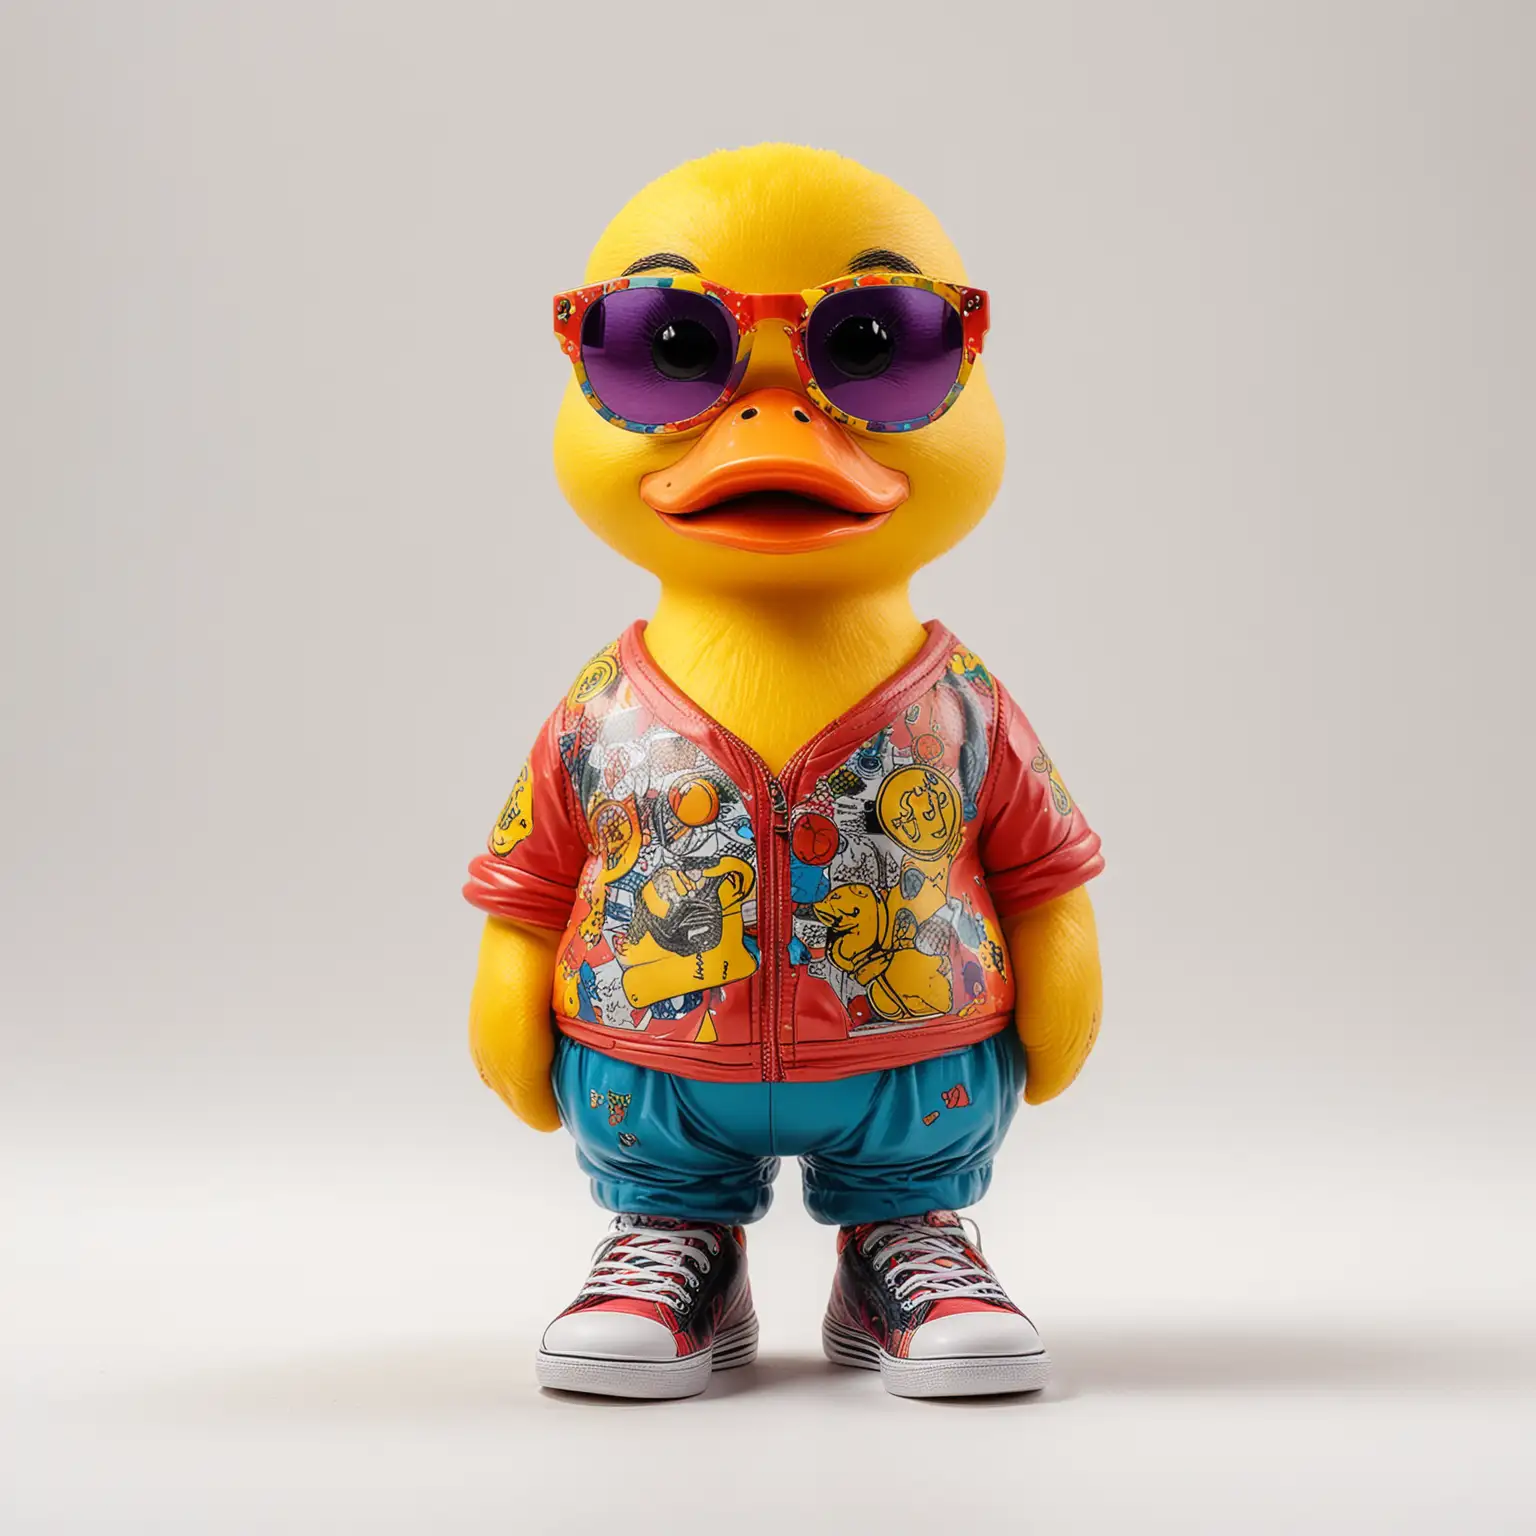 bitcoin yellow duck in full growth with colorful glasses and tattooed and dressed in sneakers on a white background